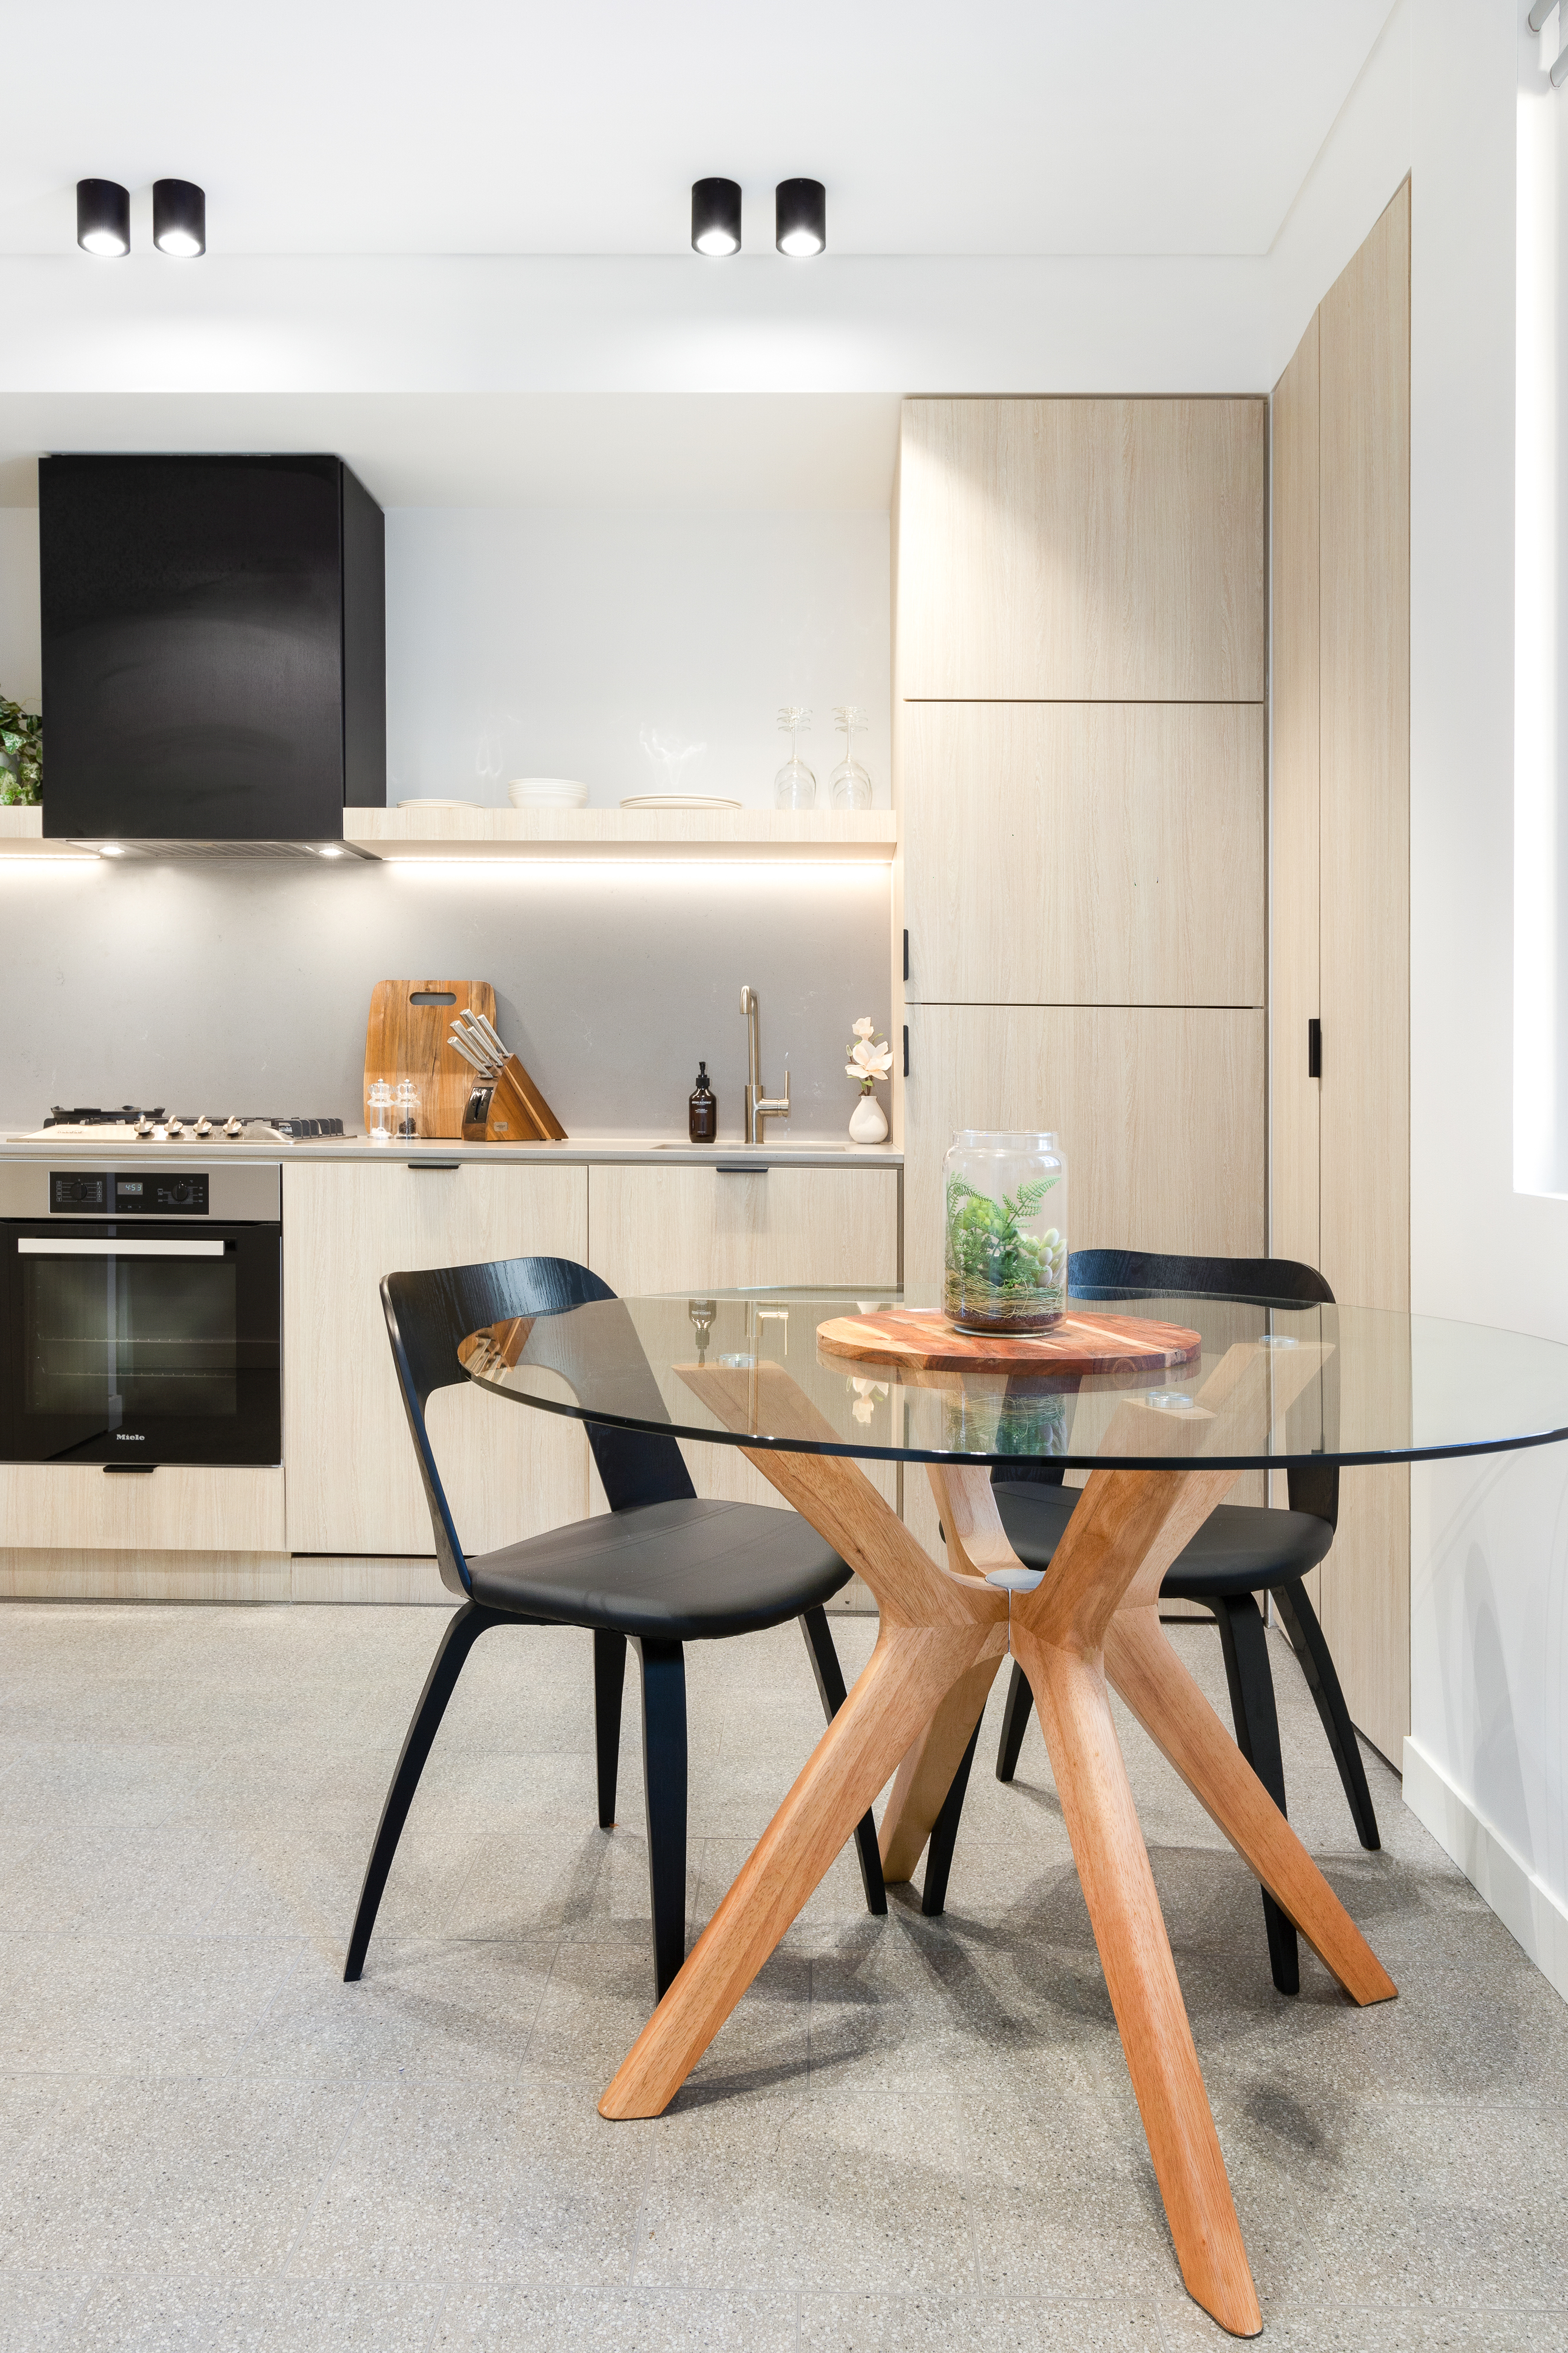 Dining - One Bedroom Apartment - Urban Rest - The Surry Apartments - Sydney